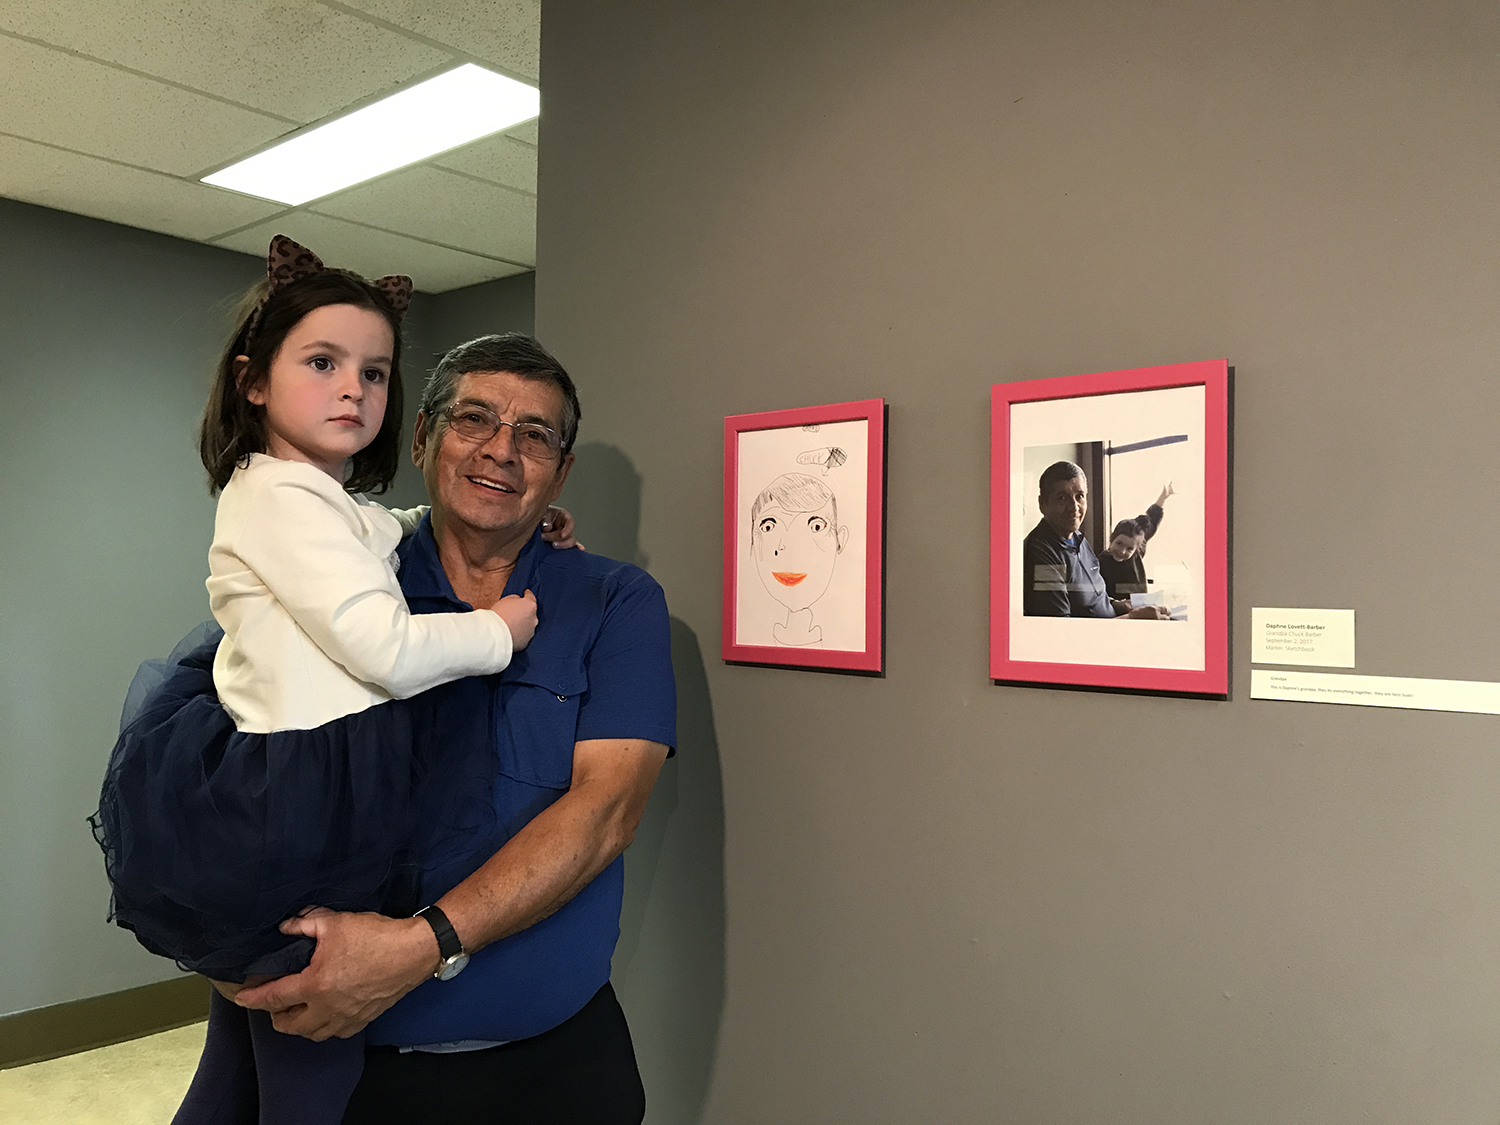 Daphne with her best bud and grandpa at the exhibit at the Yukon Arts Centre